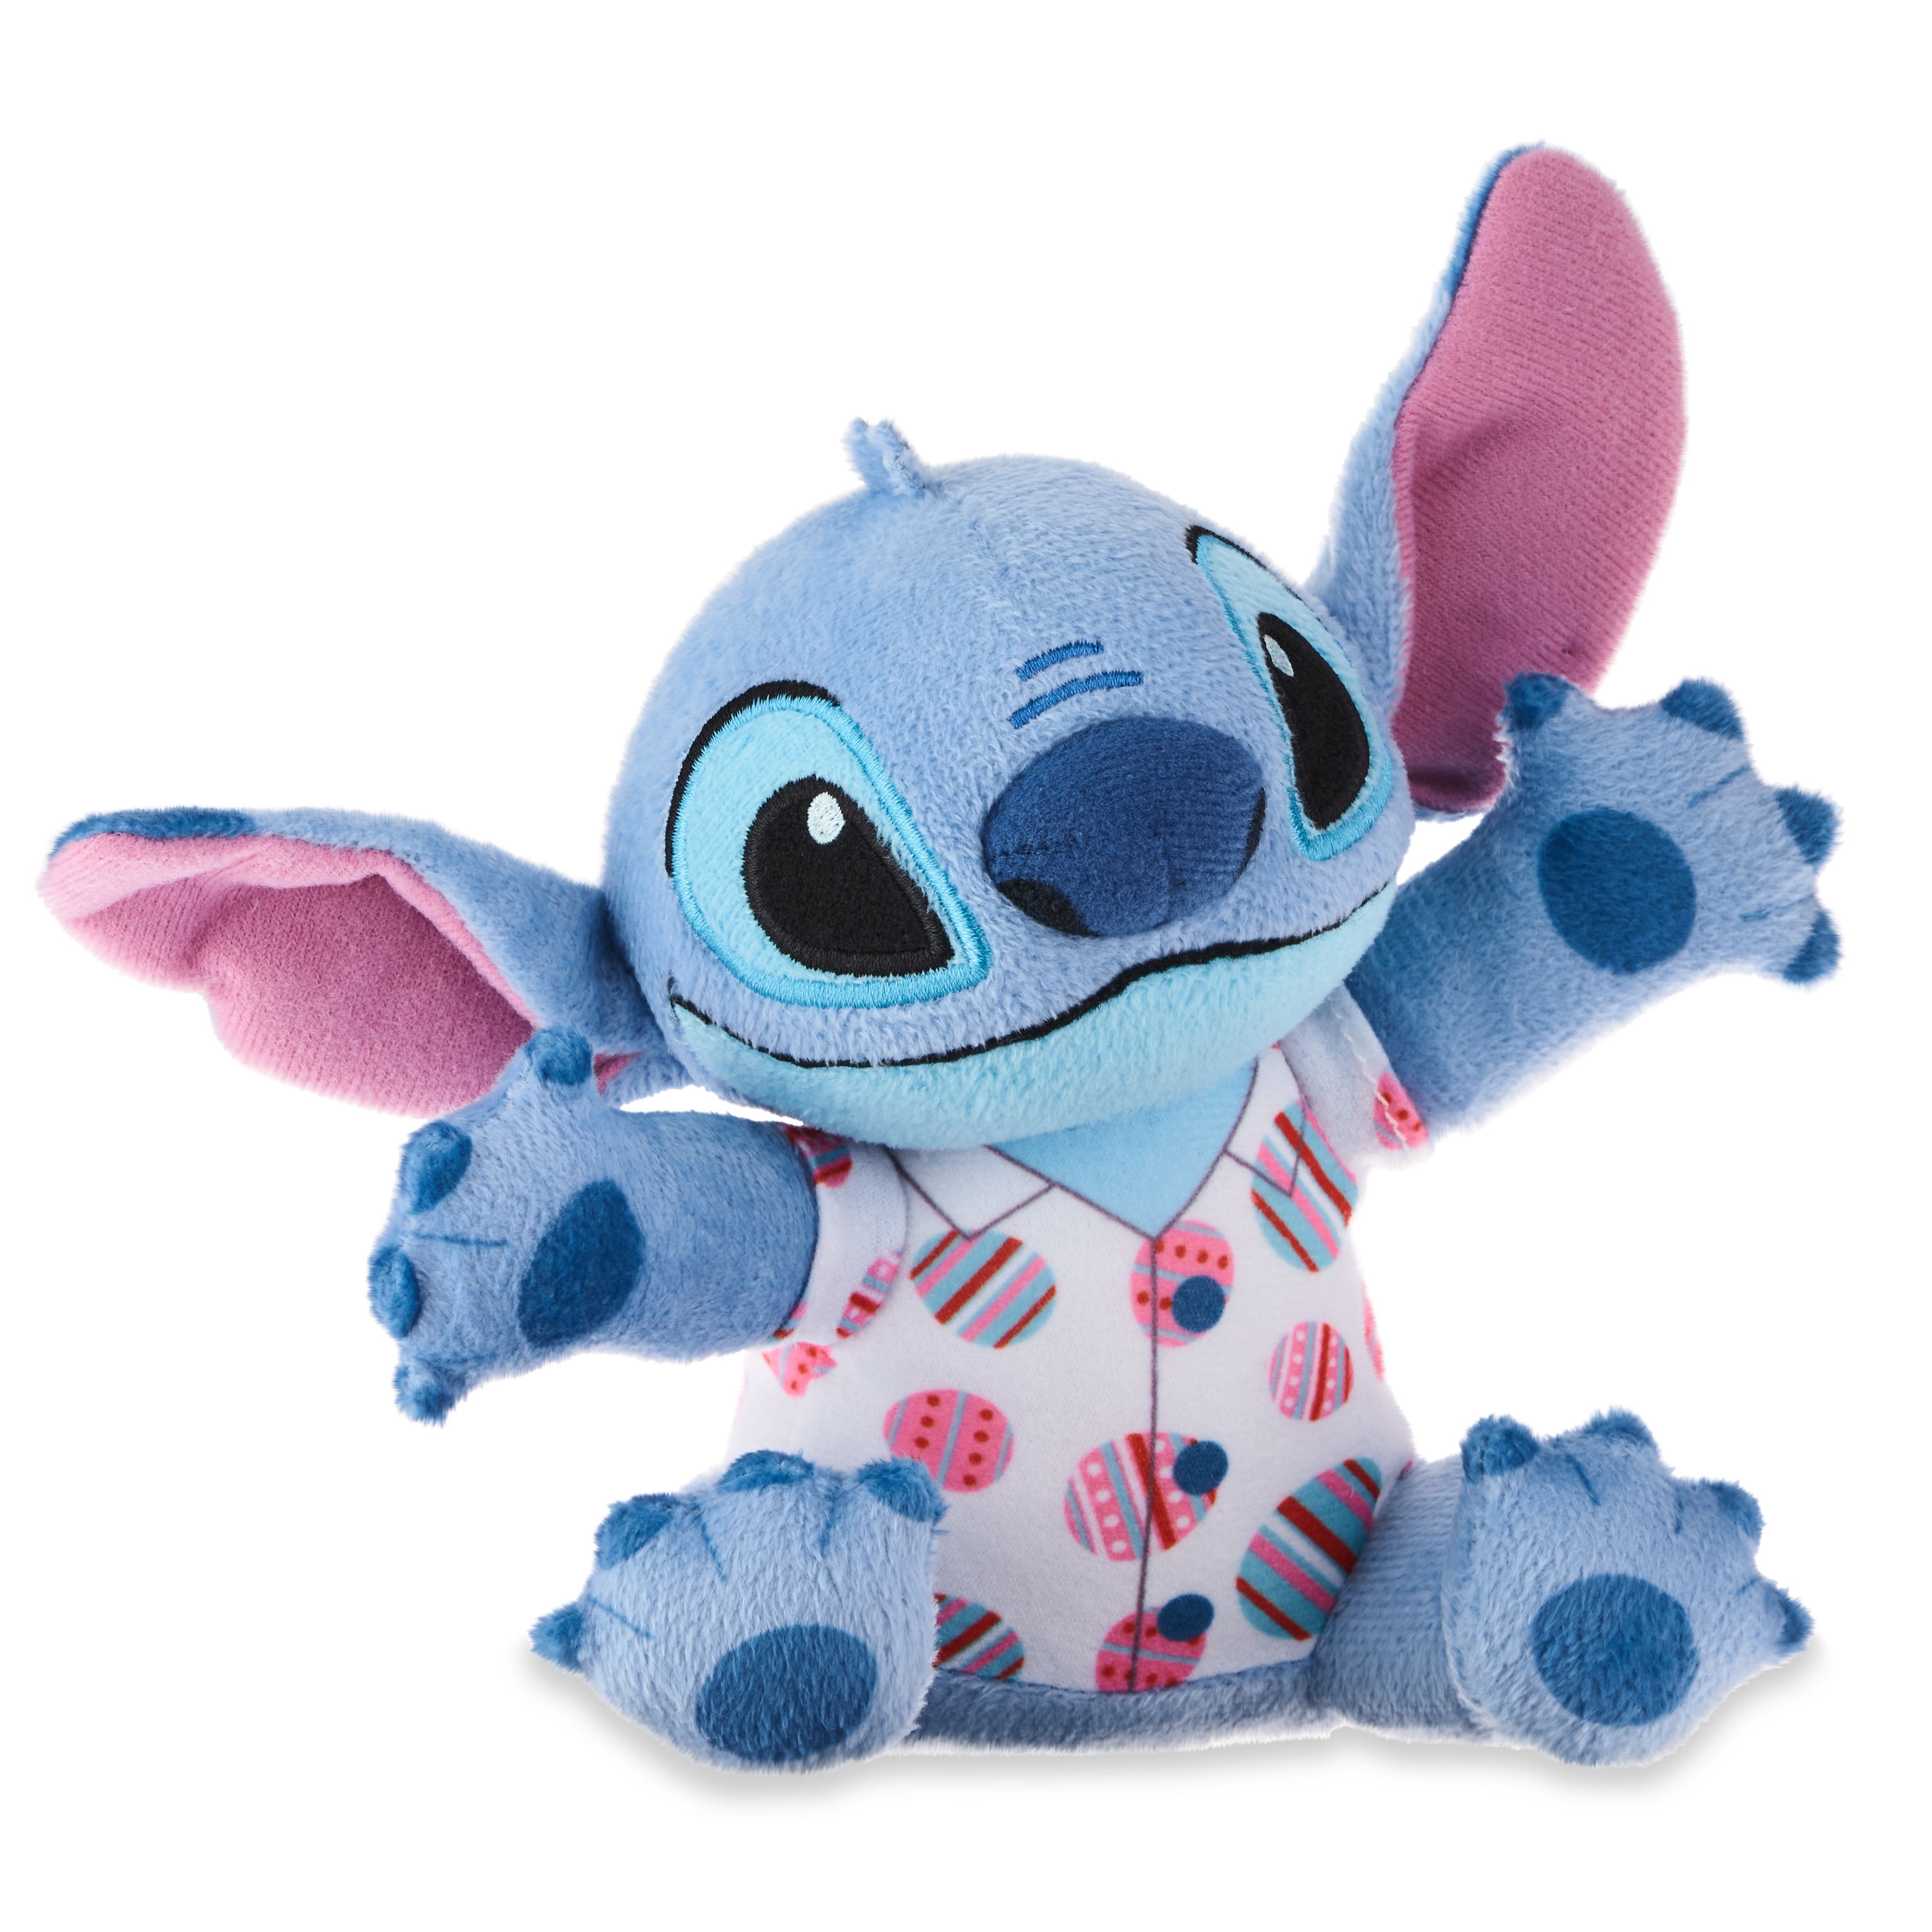 Shopping Disney Walmart for all the new Stitch merchandise! 